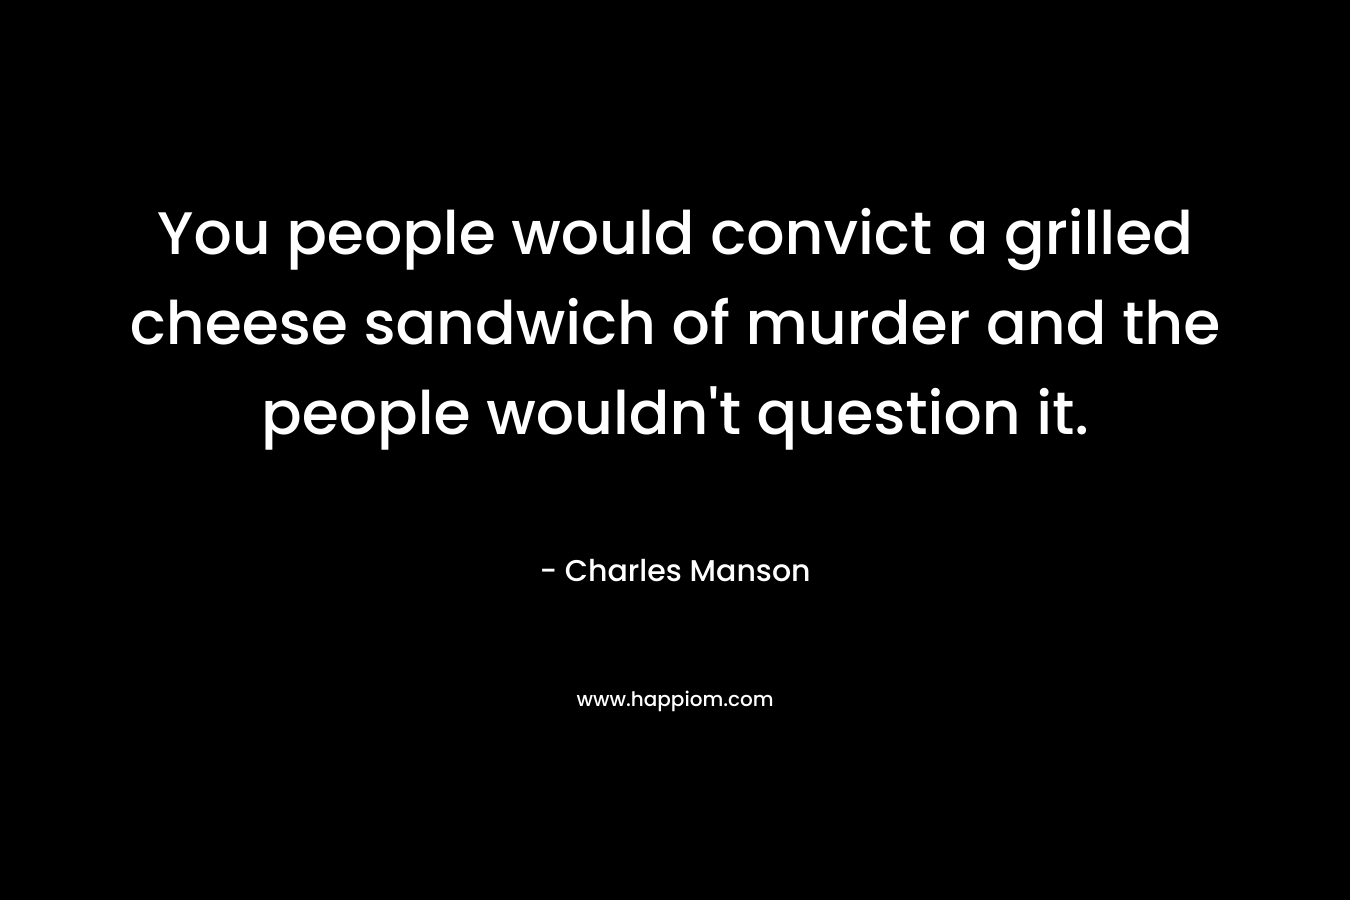 You people would convict a grilled cheese sandwich of murder and the people wouldn't question it.